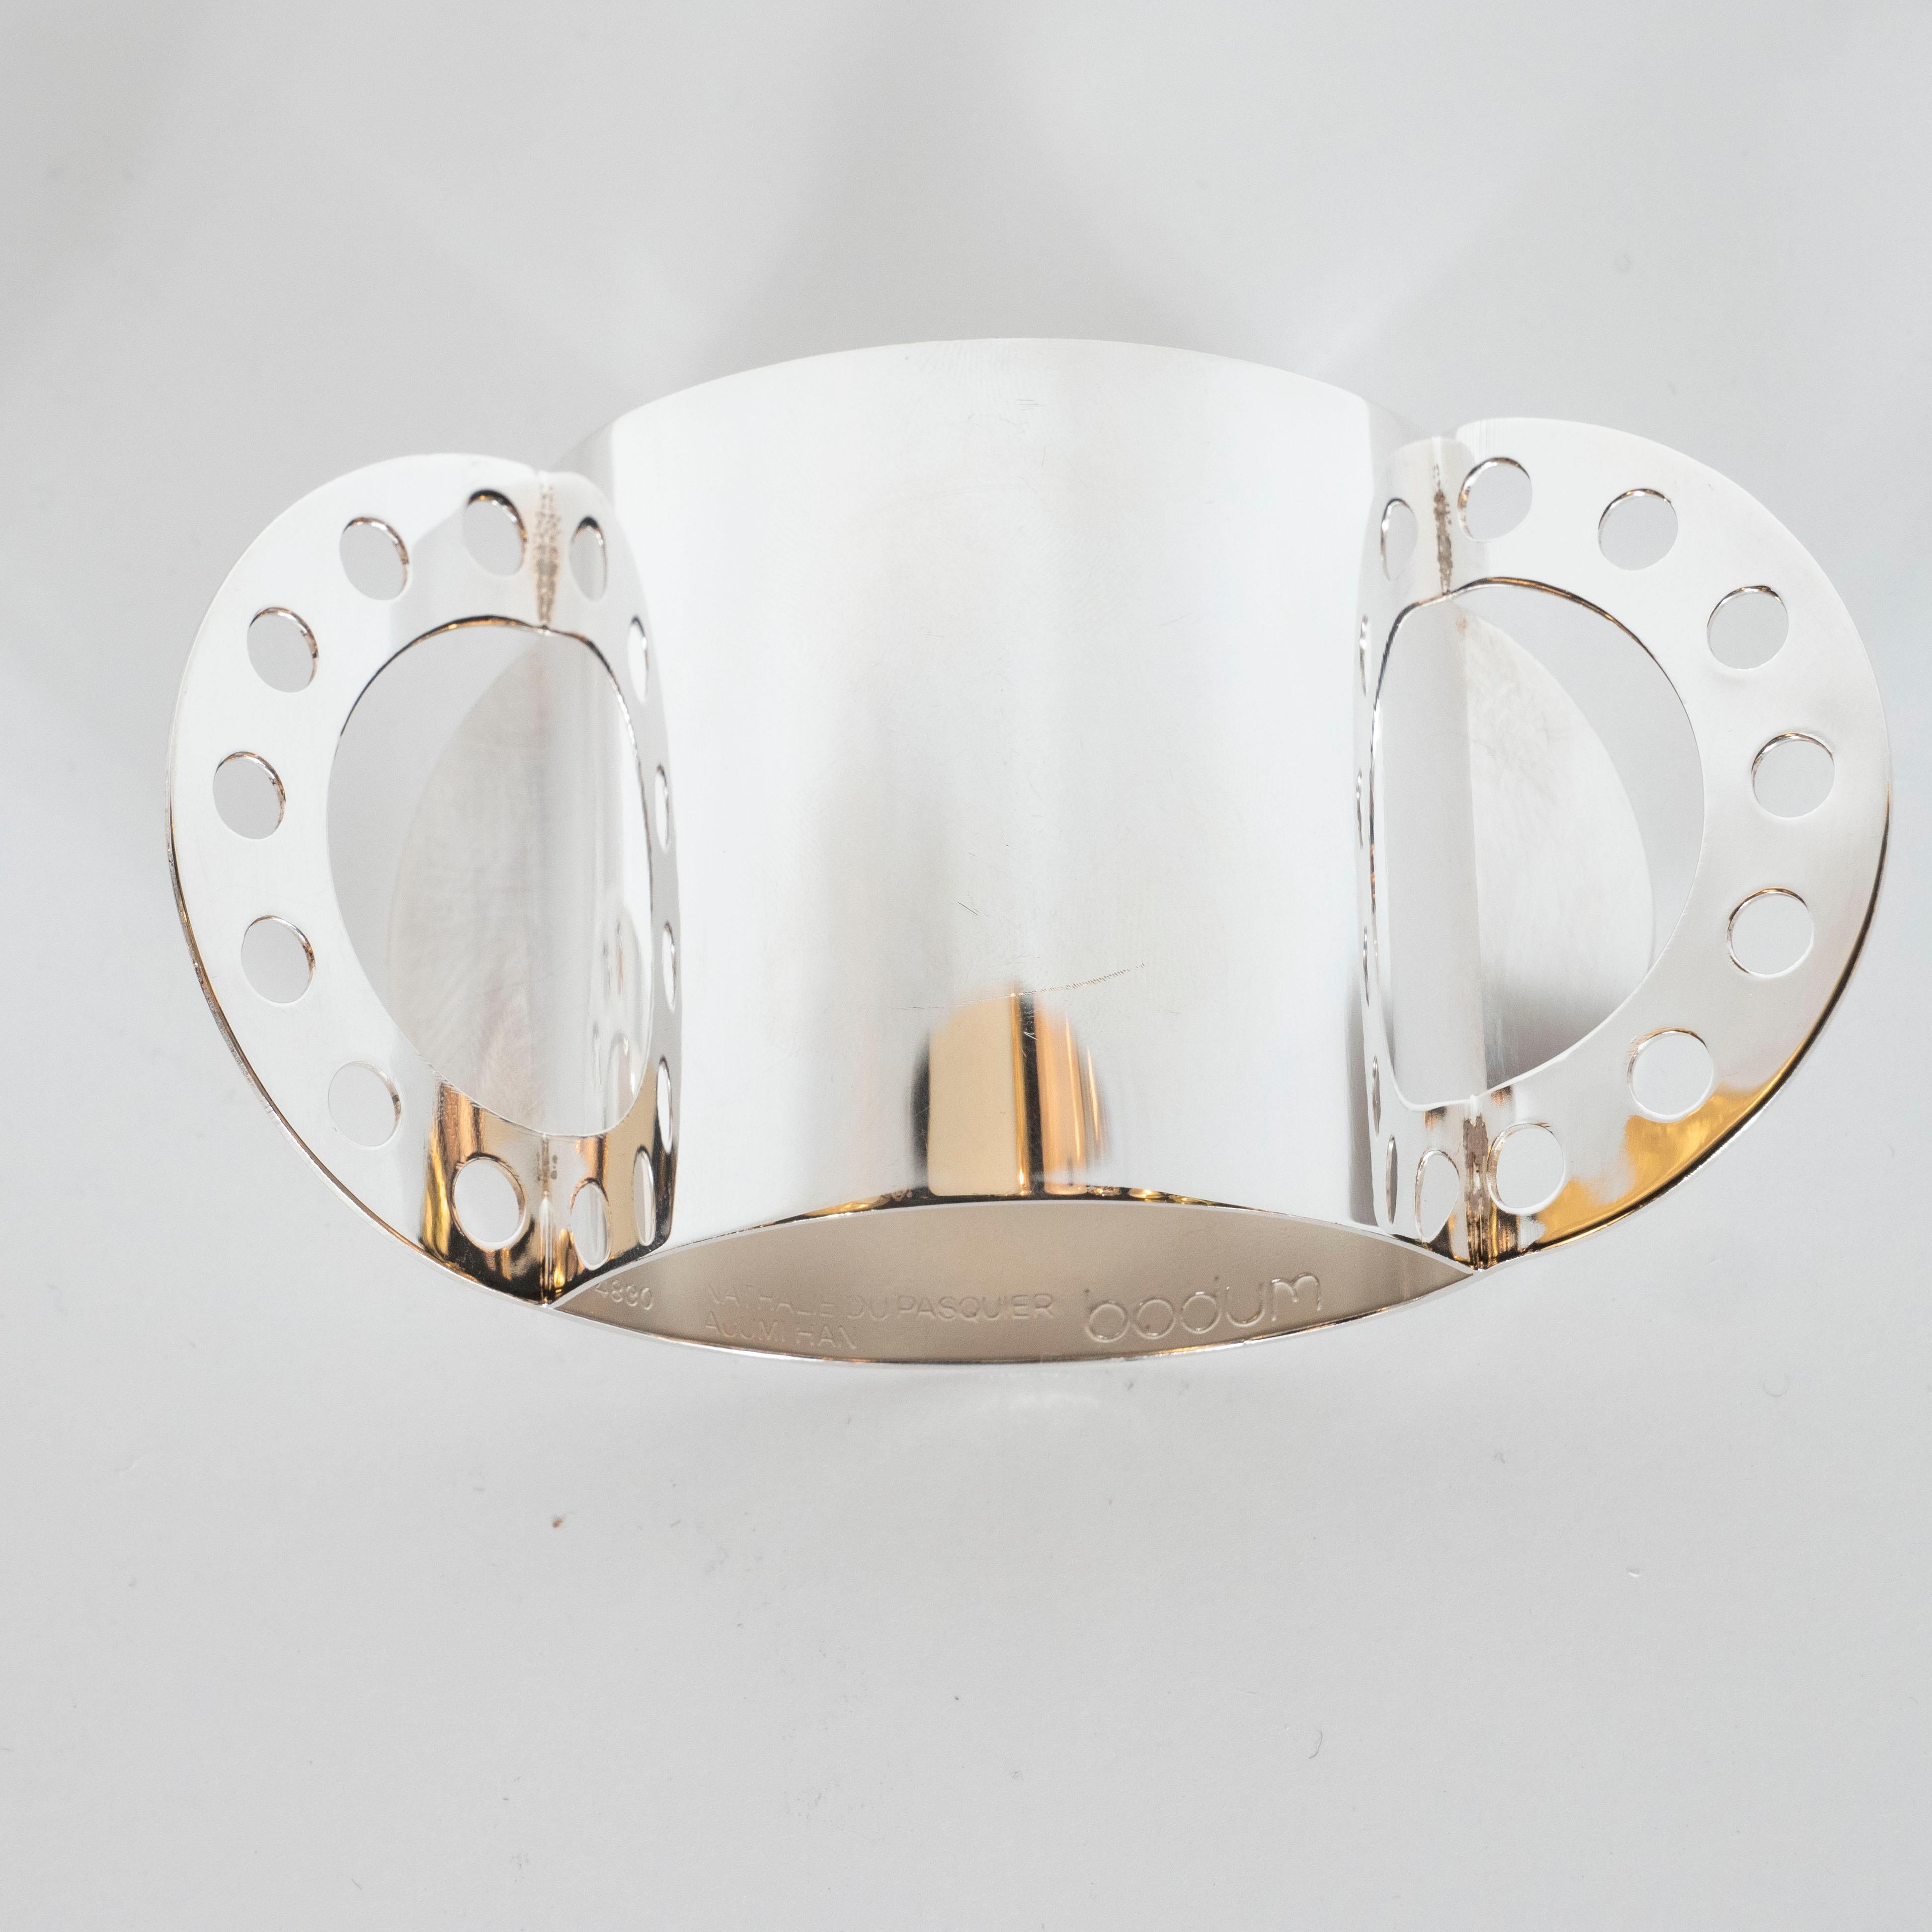 Late 20th Century Modernist Memphis Silverplate Napkin Rings by Nathalie du Pasquier for Bodum